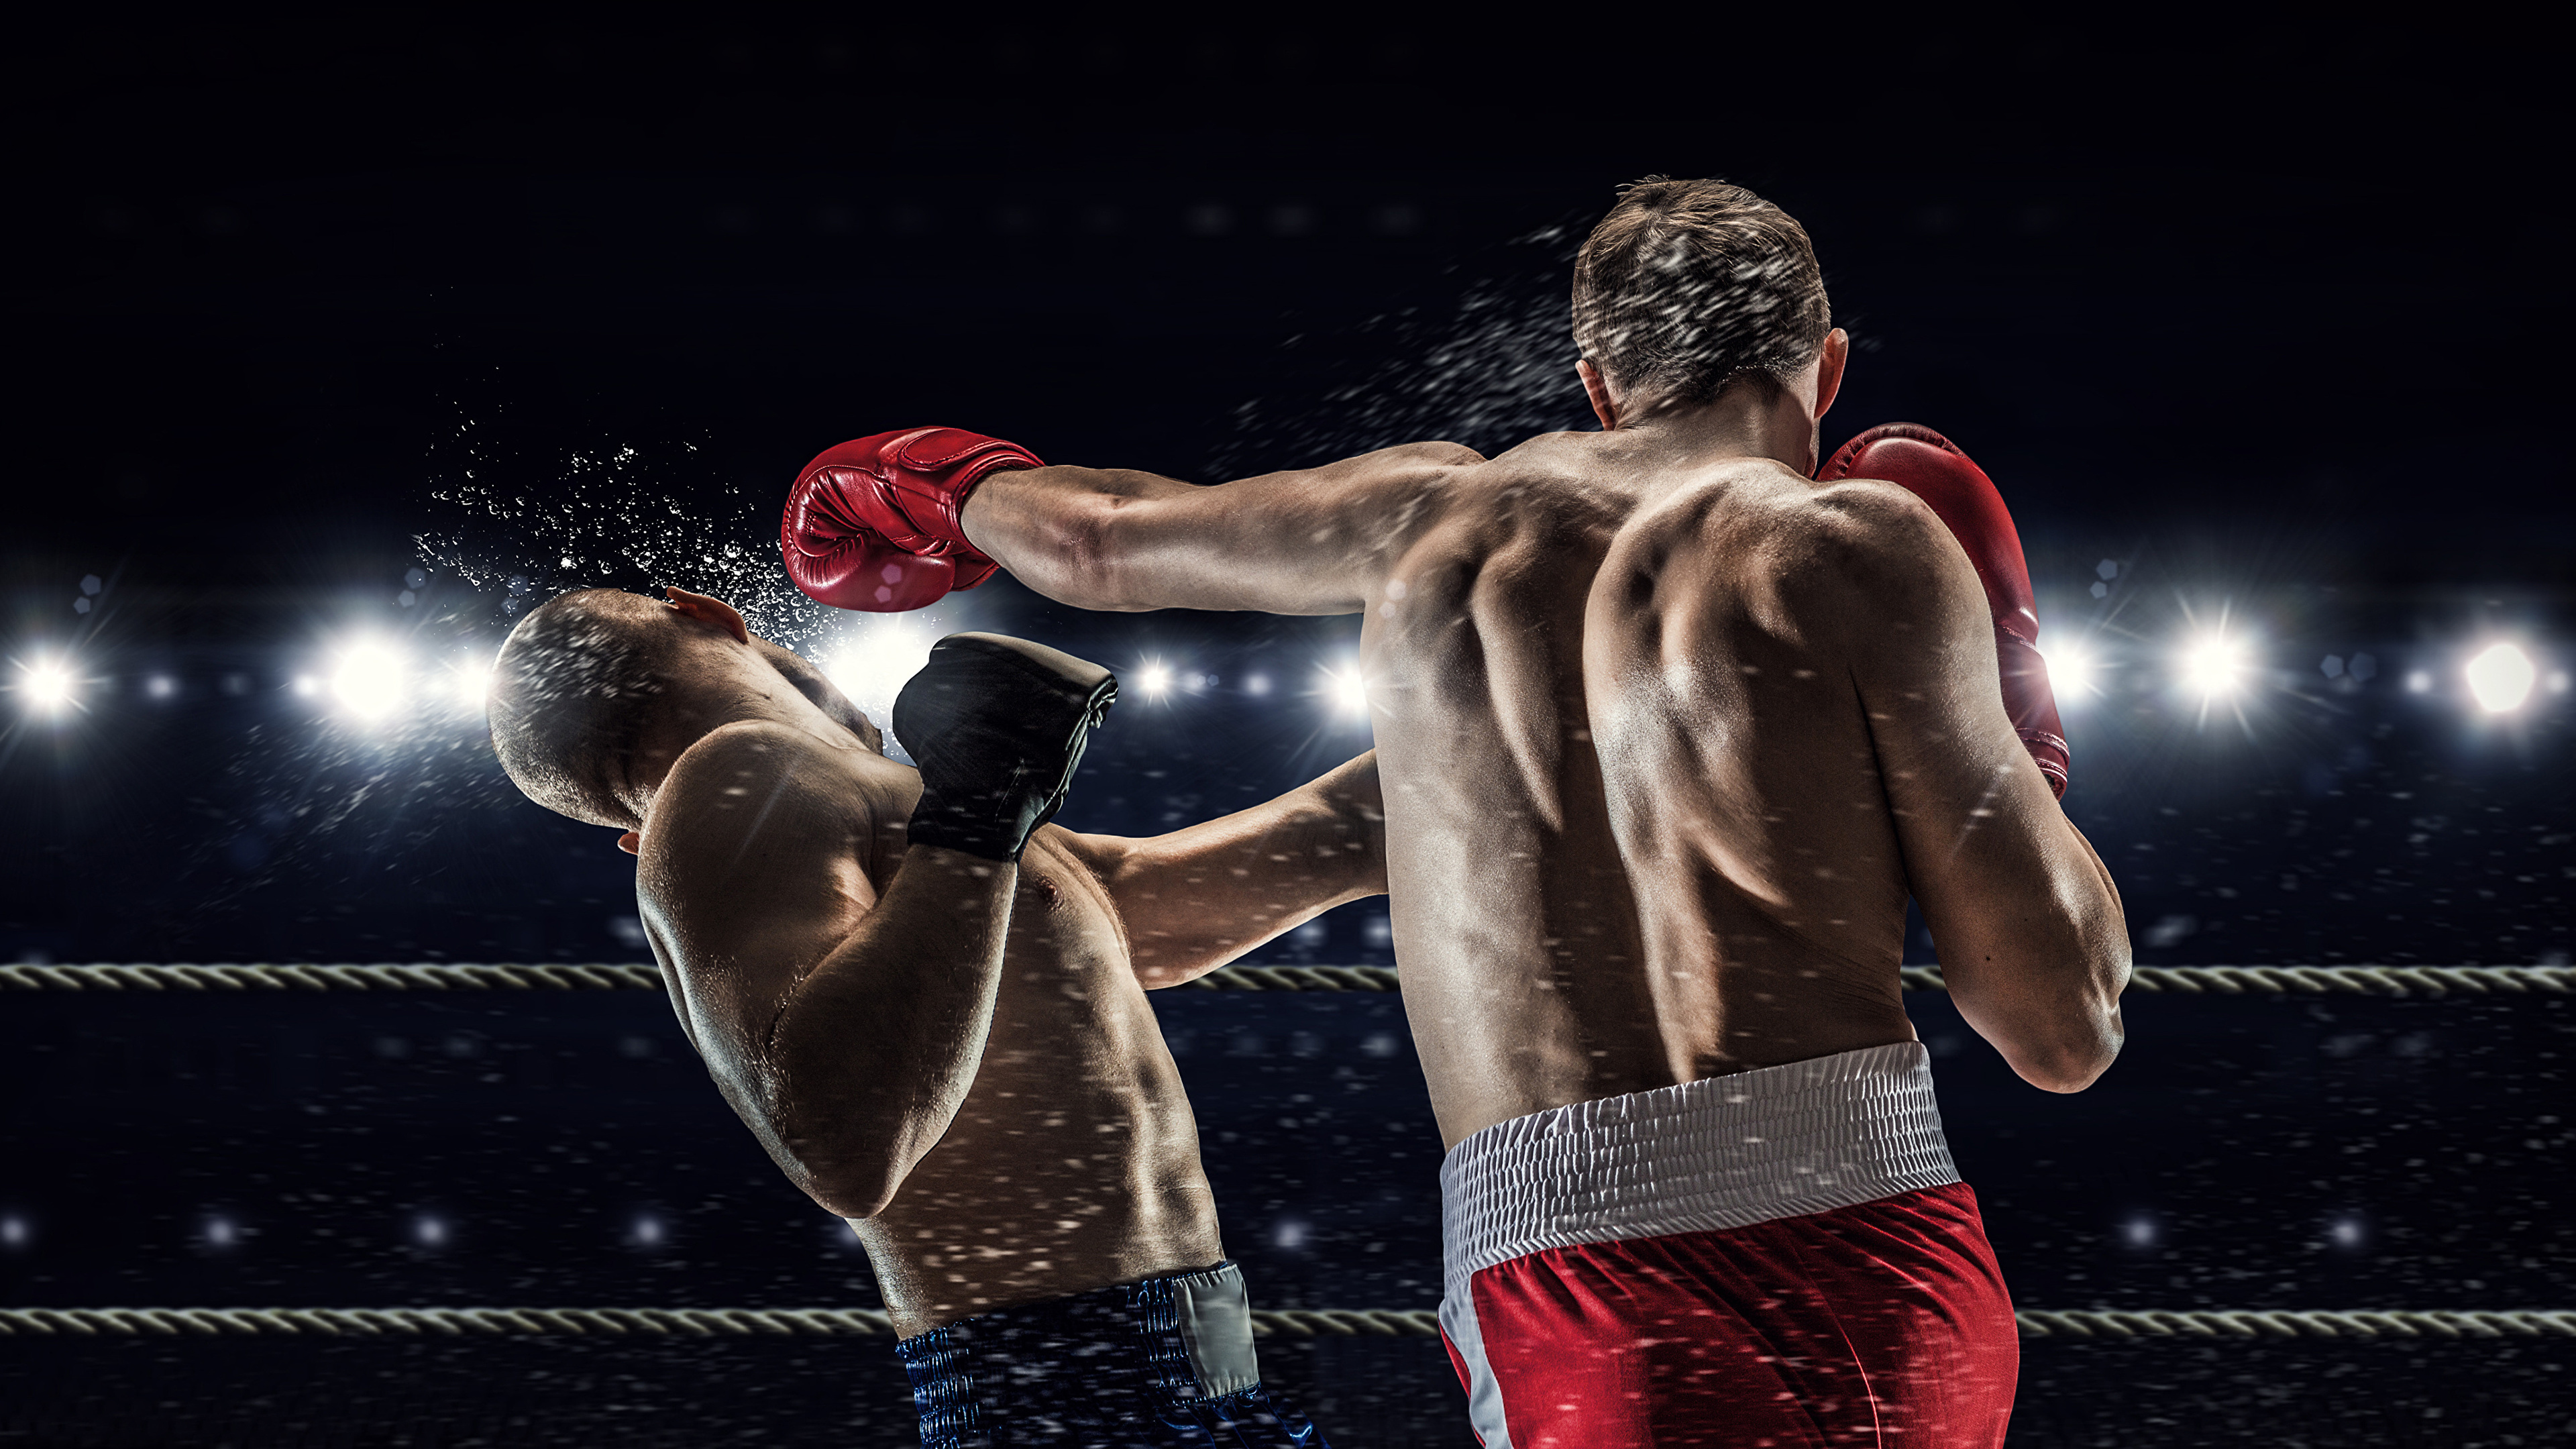 Combat Sports: Boxing Championship, World Boxing Association, Weight Divisions, Kick, Punch, IBF. 3840x2160 4K Background.